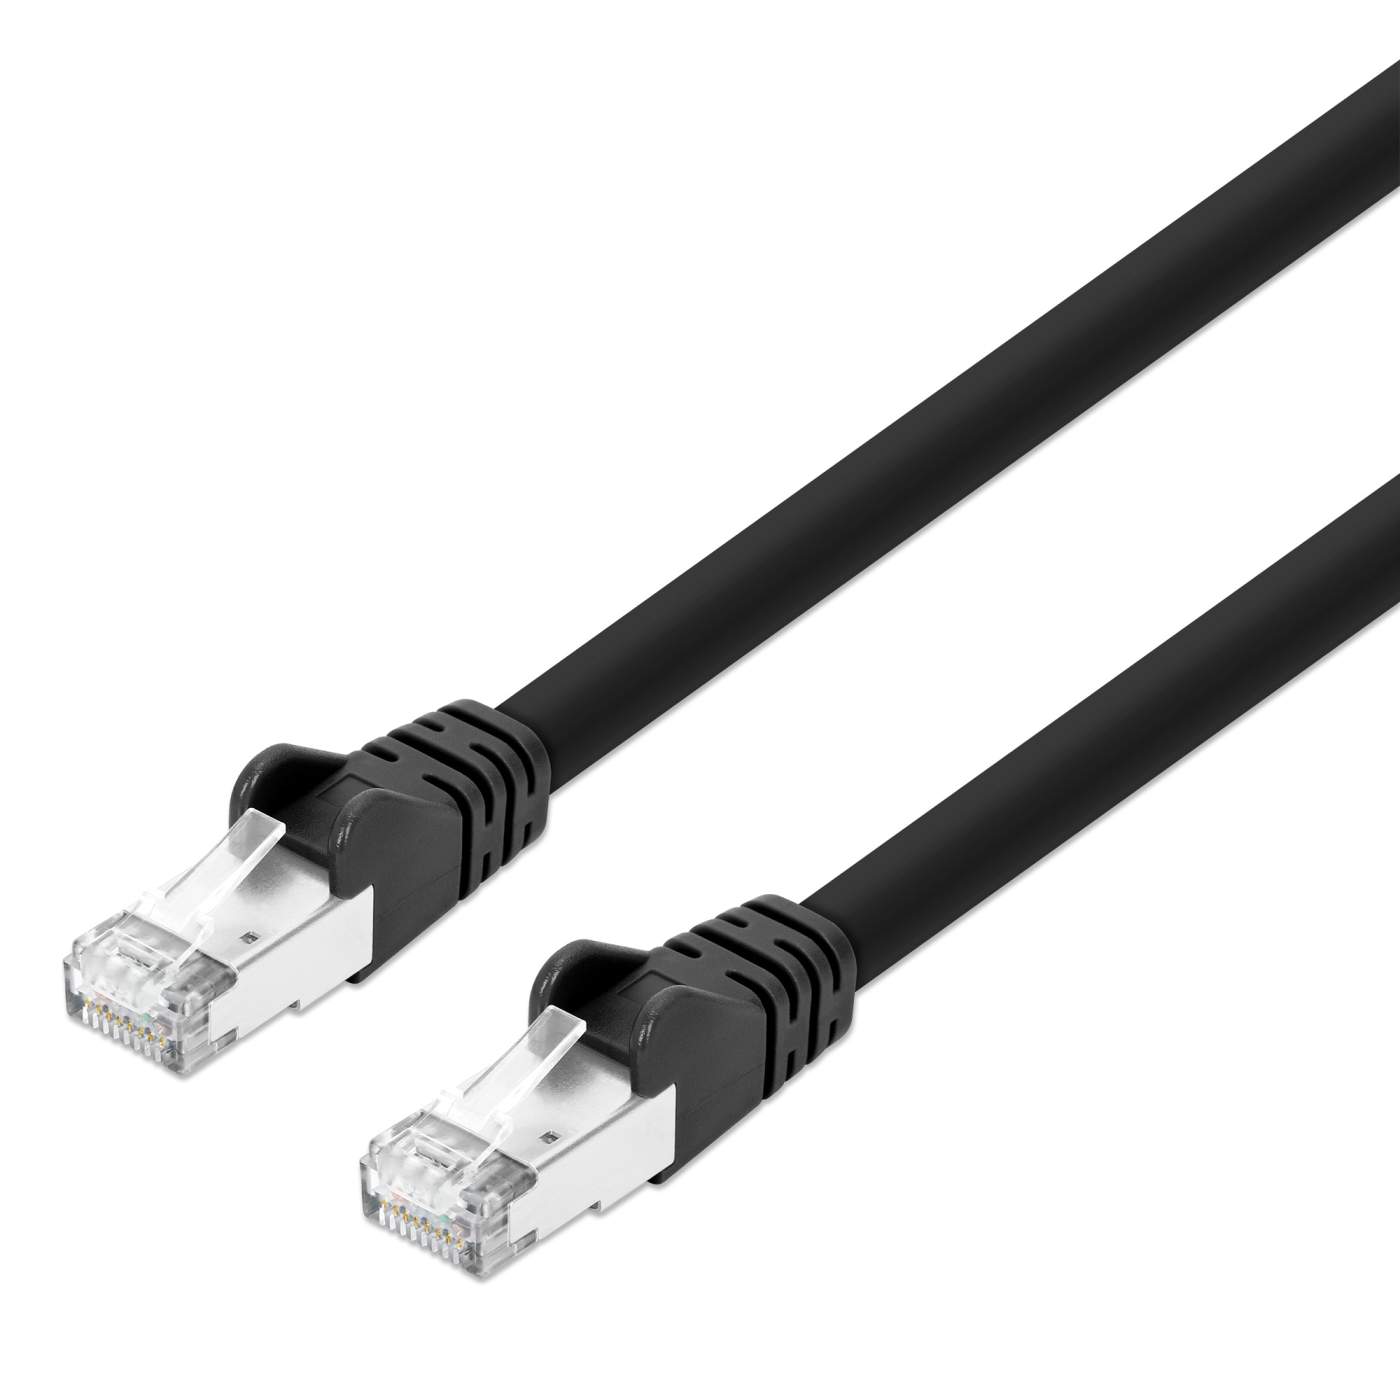 CAT8 RJ45 network cable